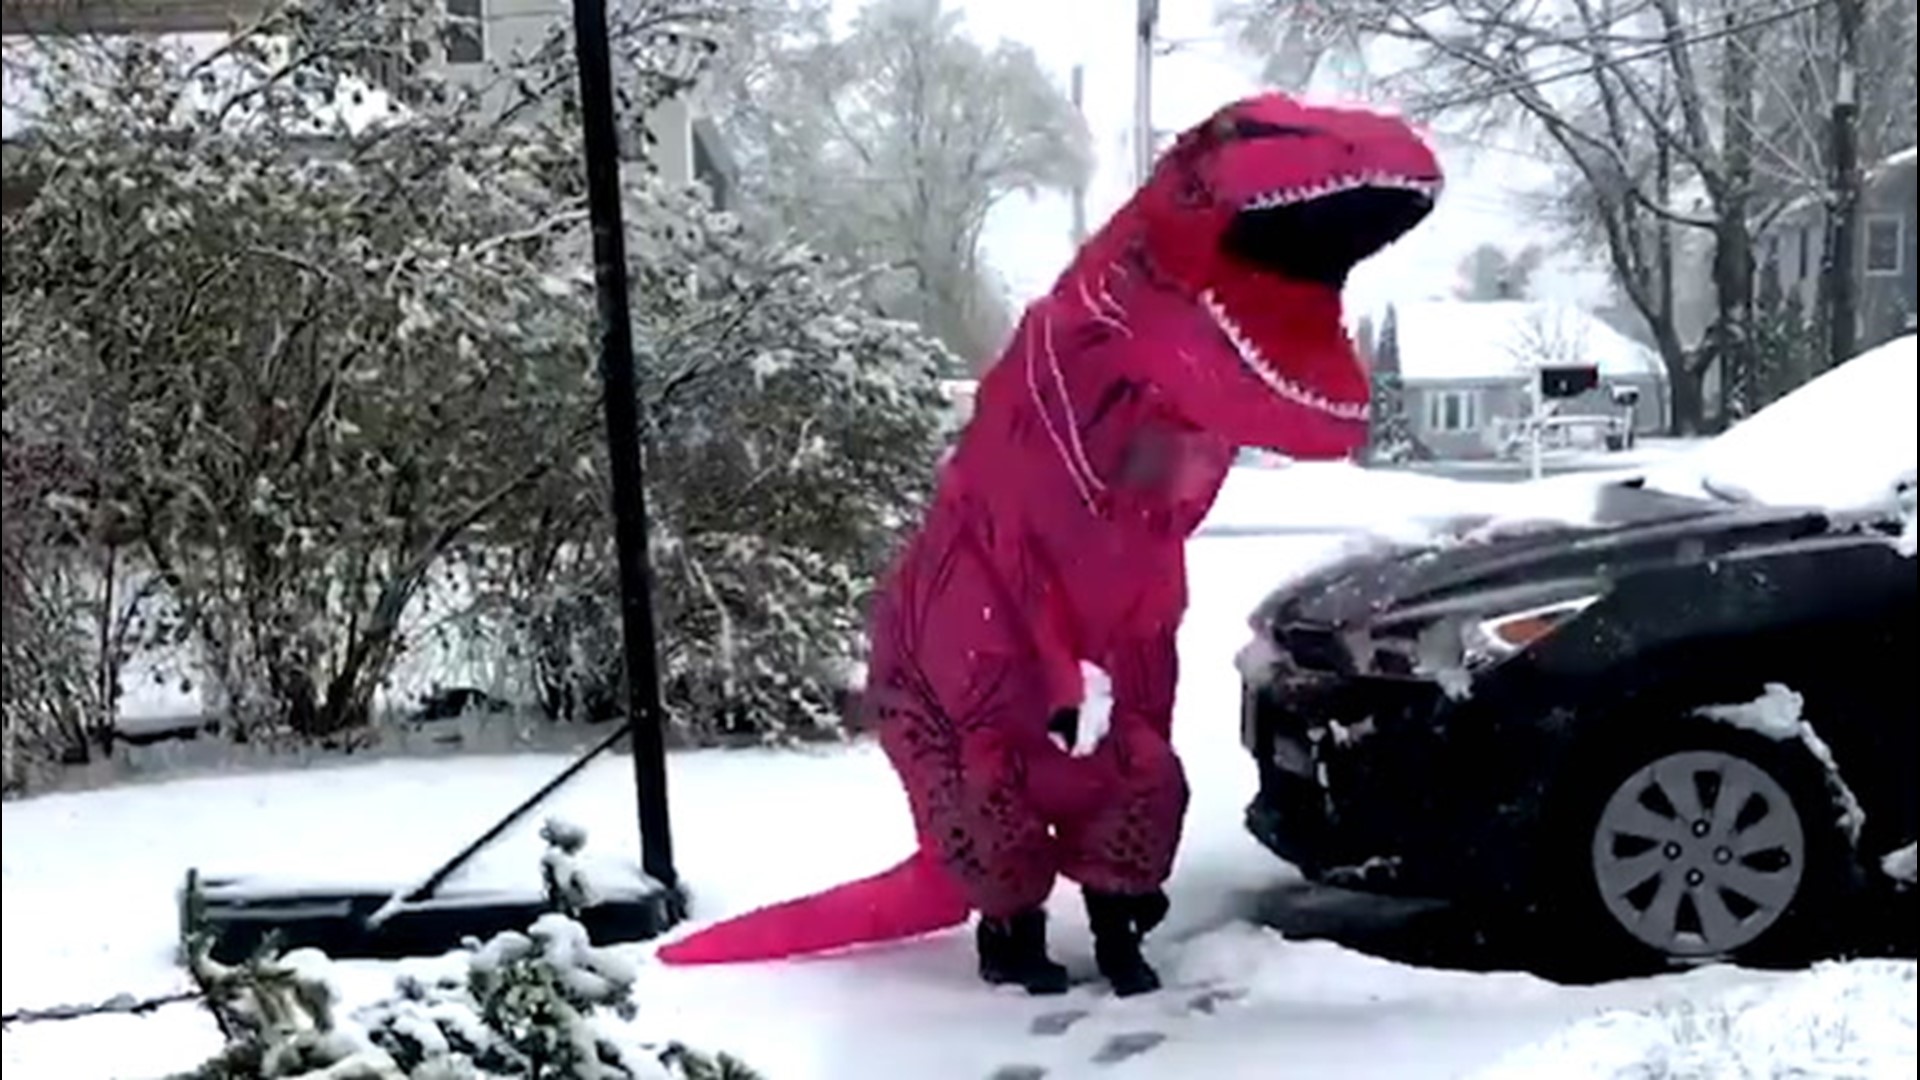 A person donning a dinosaur costume - referred to as 'Pinky T-Rexadero' - took time to have some fun as snow coated Massachusetts neighborhoods on April 16.